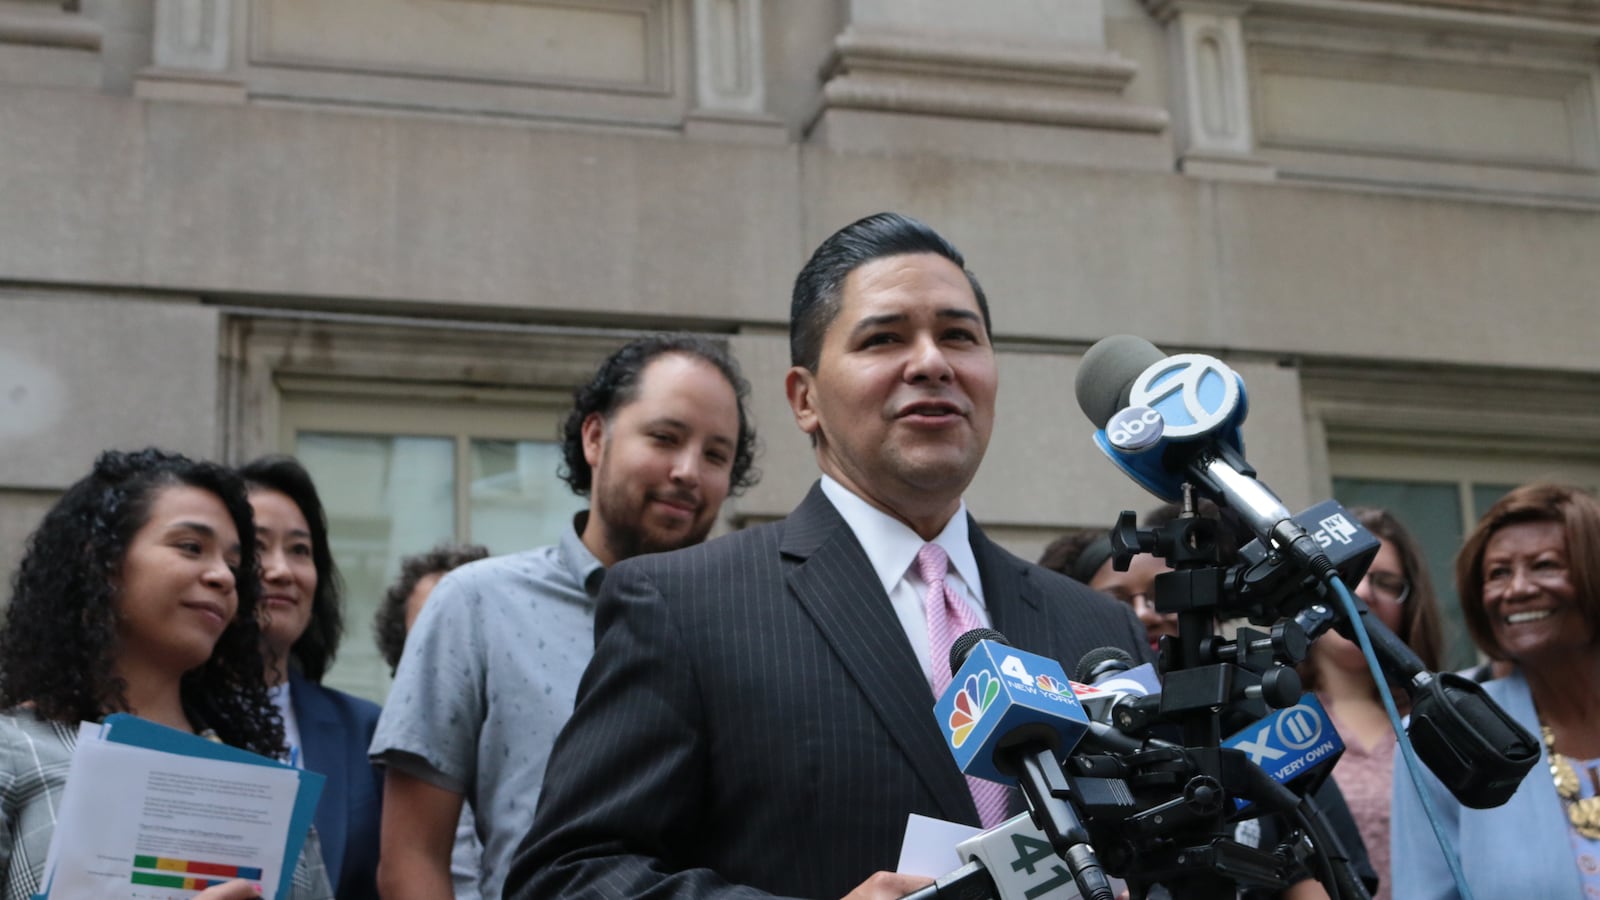 Schools Chancellor Richard Carranza and other elected officials began weighing in on recommendations to integrate New York City schools, including a proposal to phase out gifted programs as they are currently run.